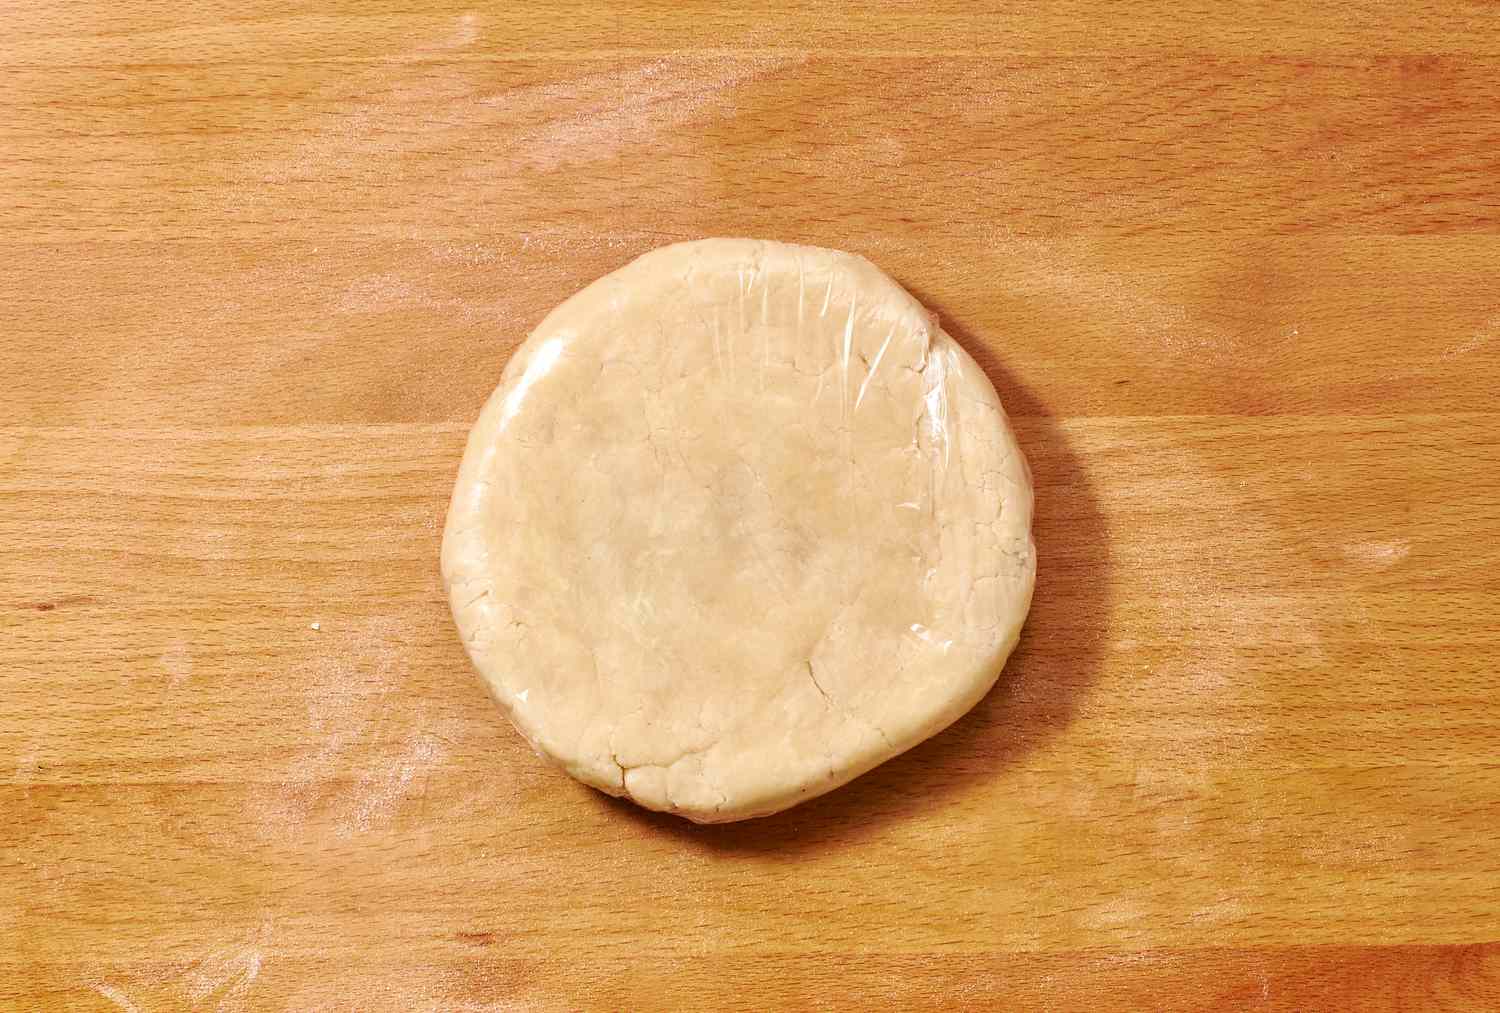 A small round disc of dough on a floured surface